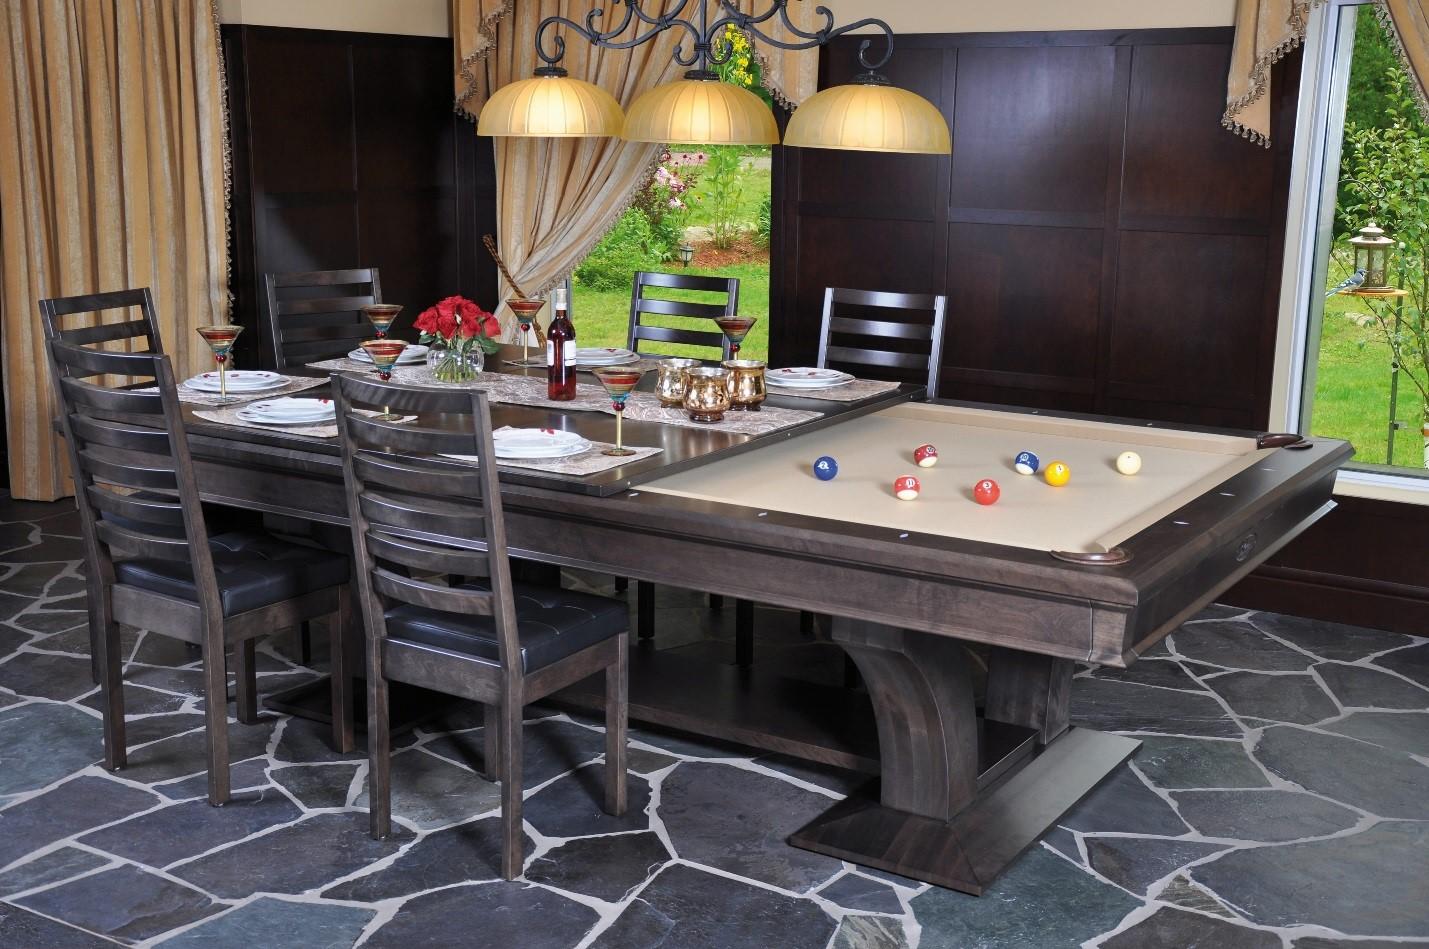 Dining Room Table With Pool Table